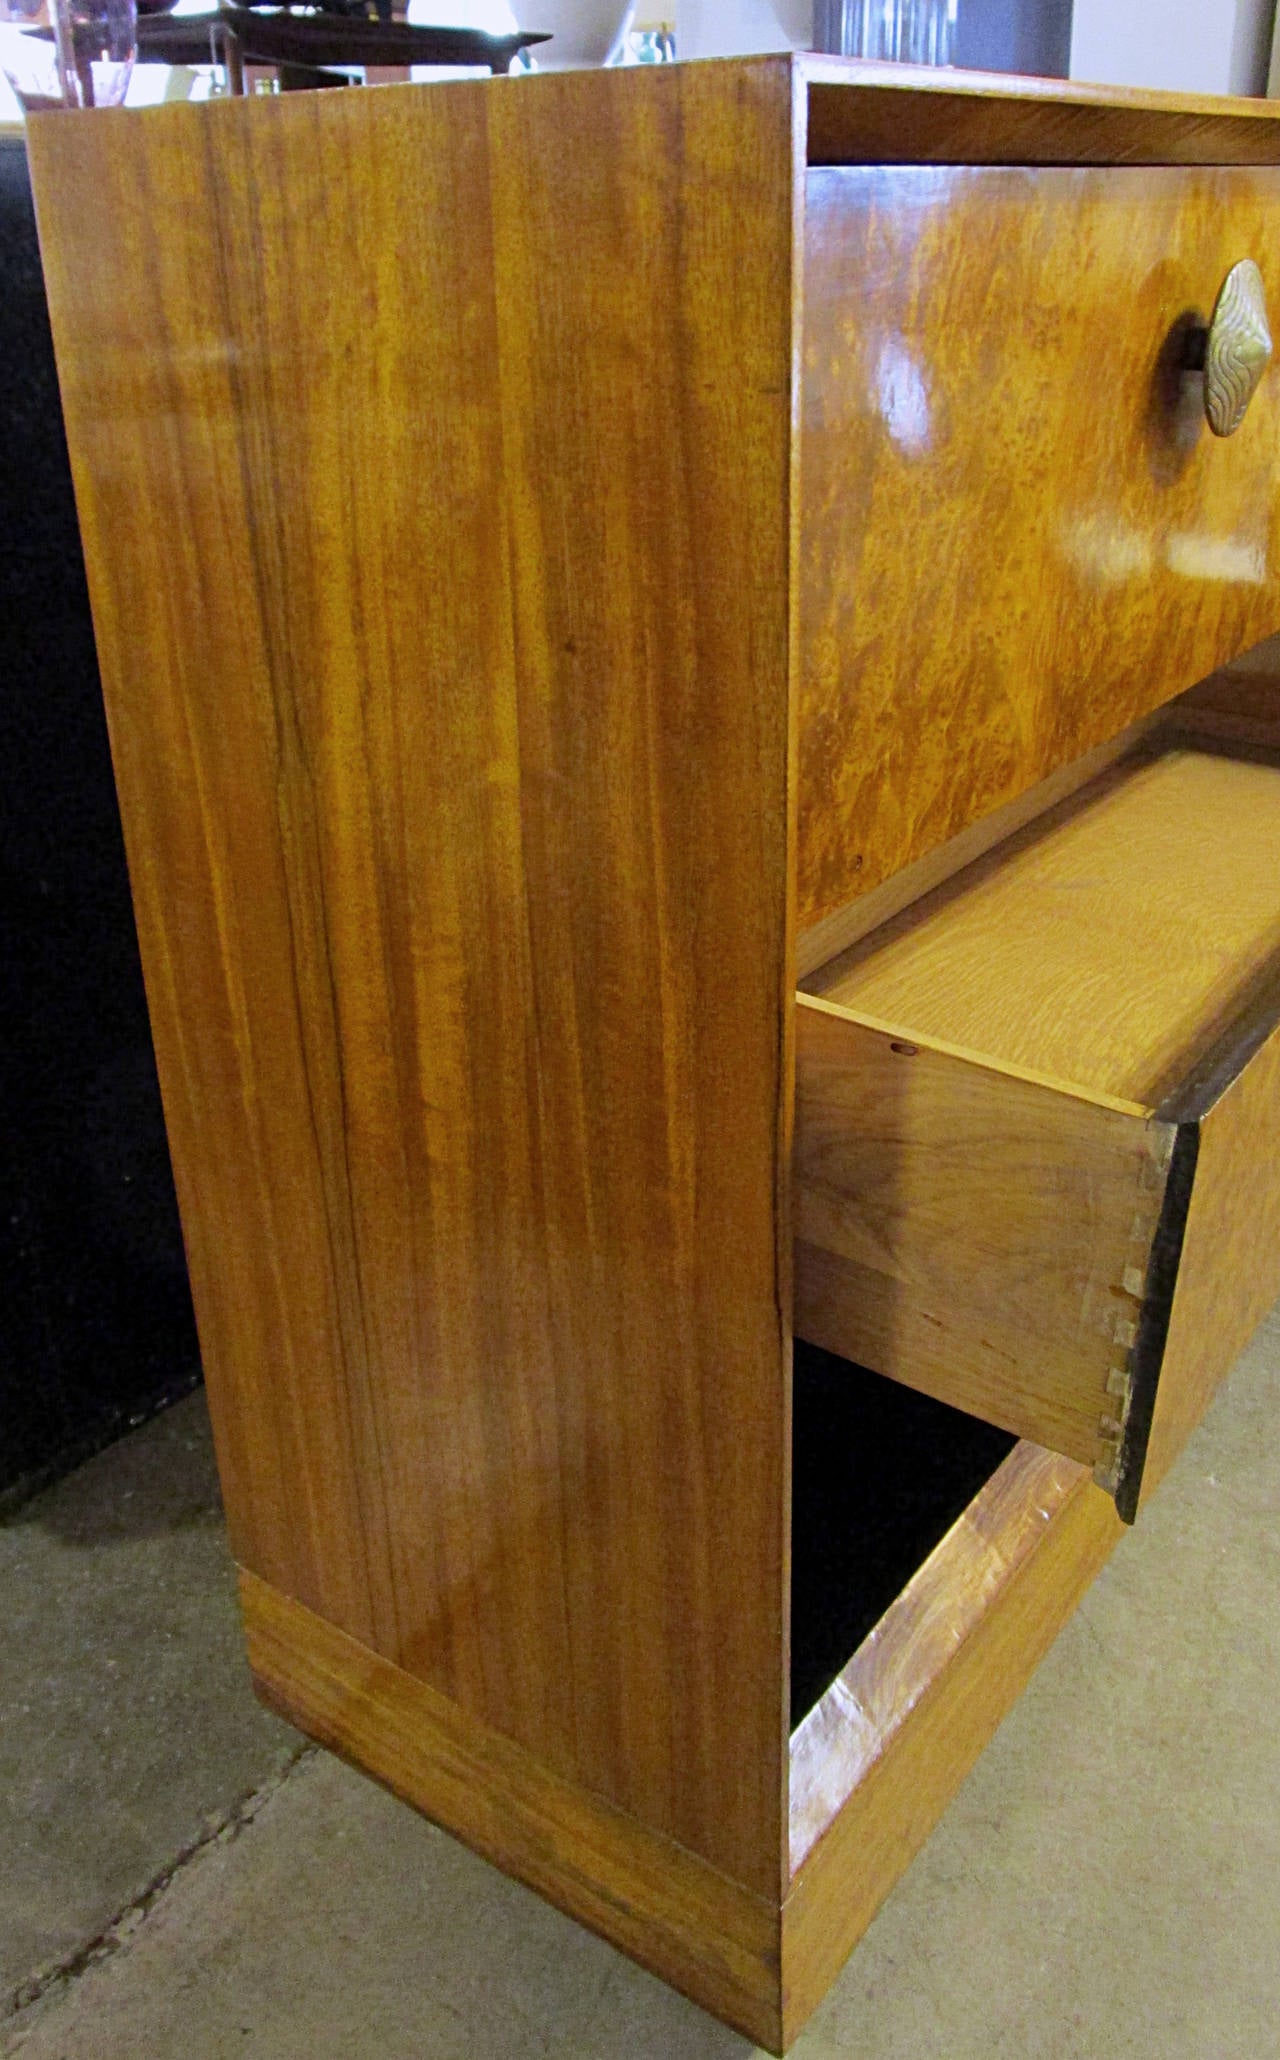 An exquisite deco cabinet designed by Gilbert Rohde in 1940 for Herman Miller. This piece is comprised of Paldao wood for the top sides and base with a beautiful Acacia burl for the drawer and drop front as well as interior beveled edge. Interior